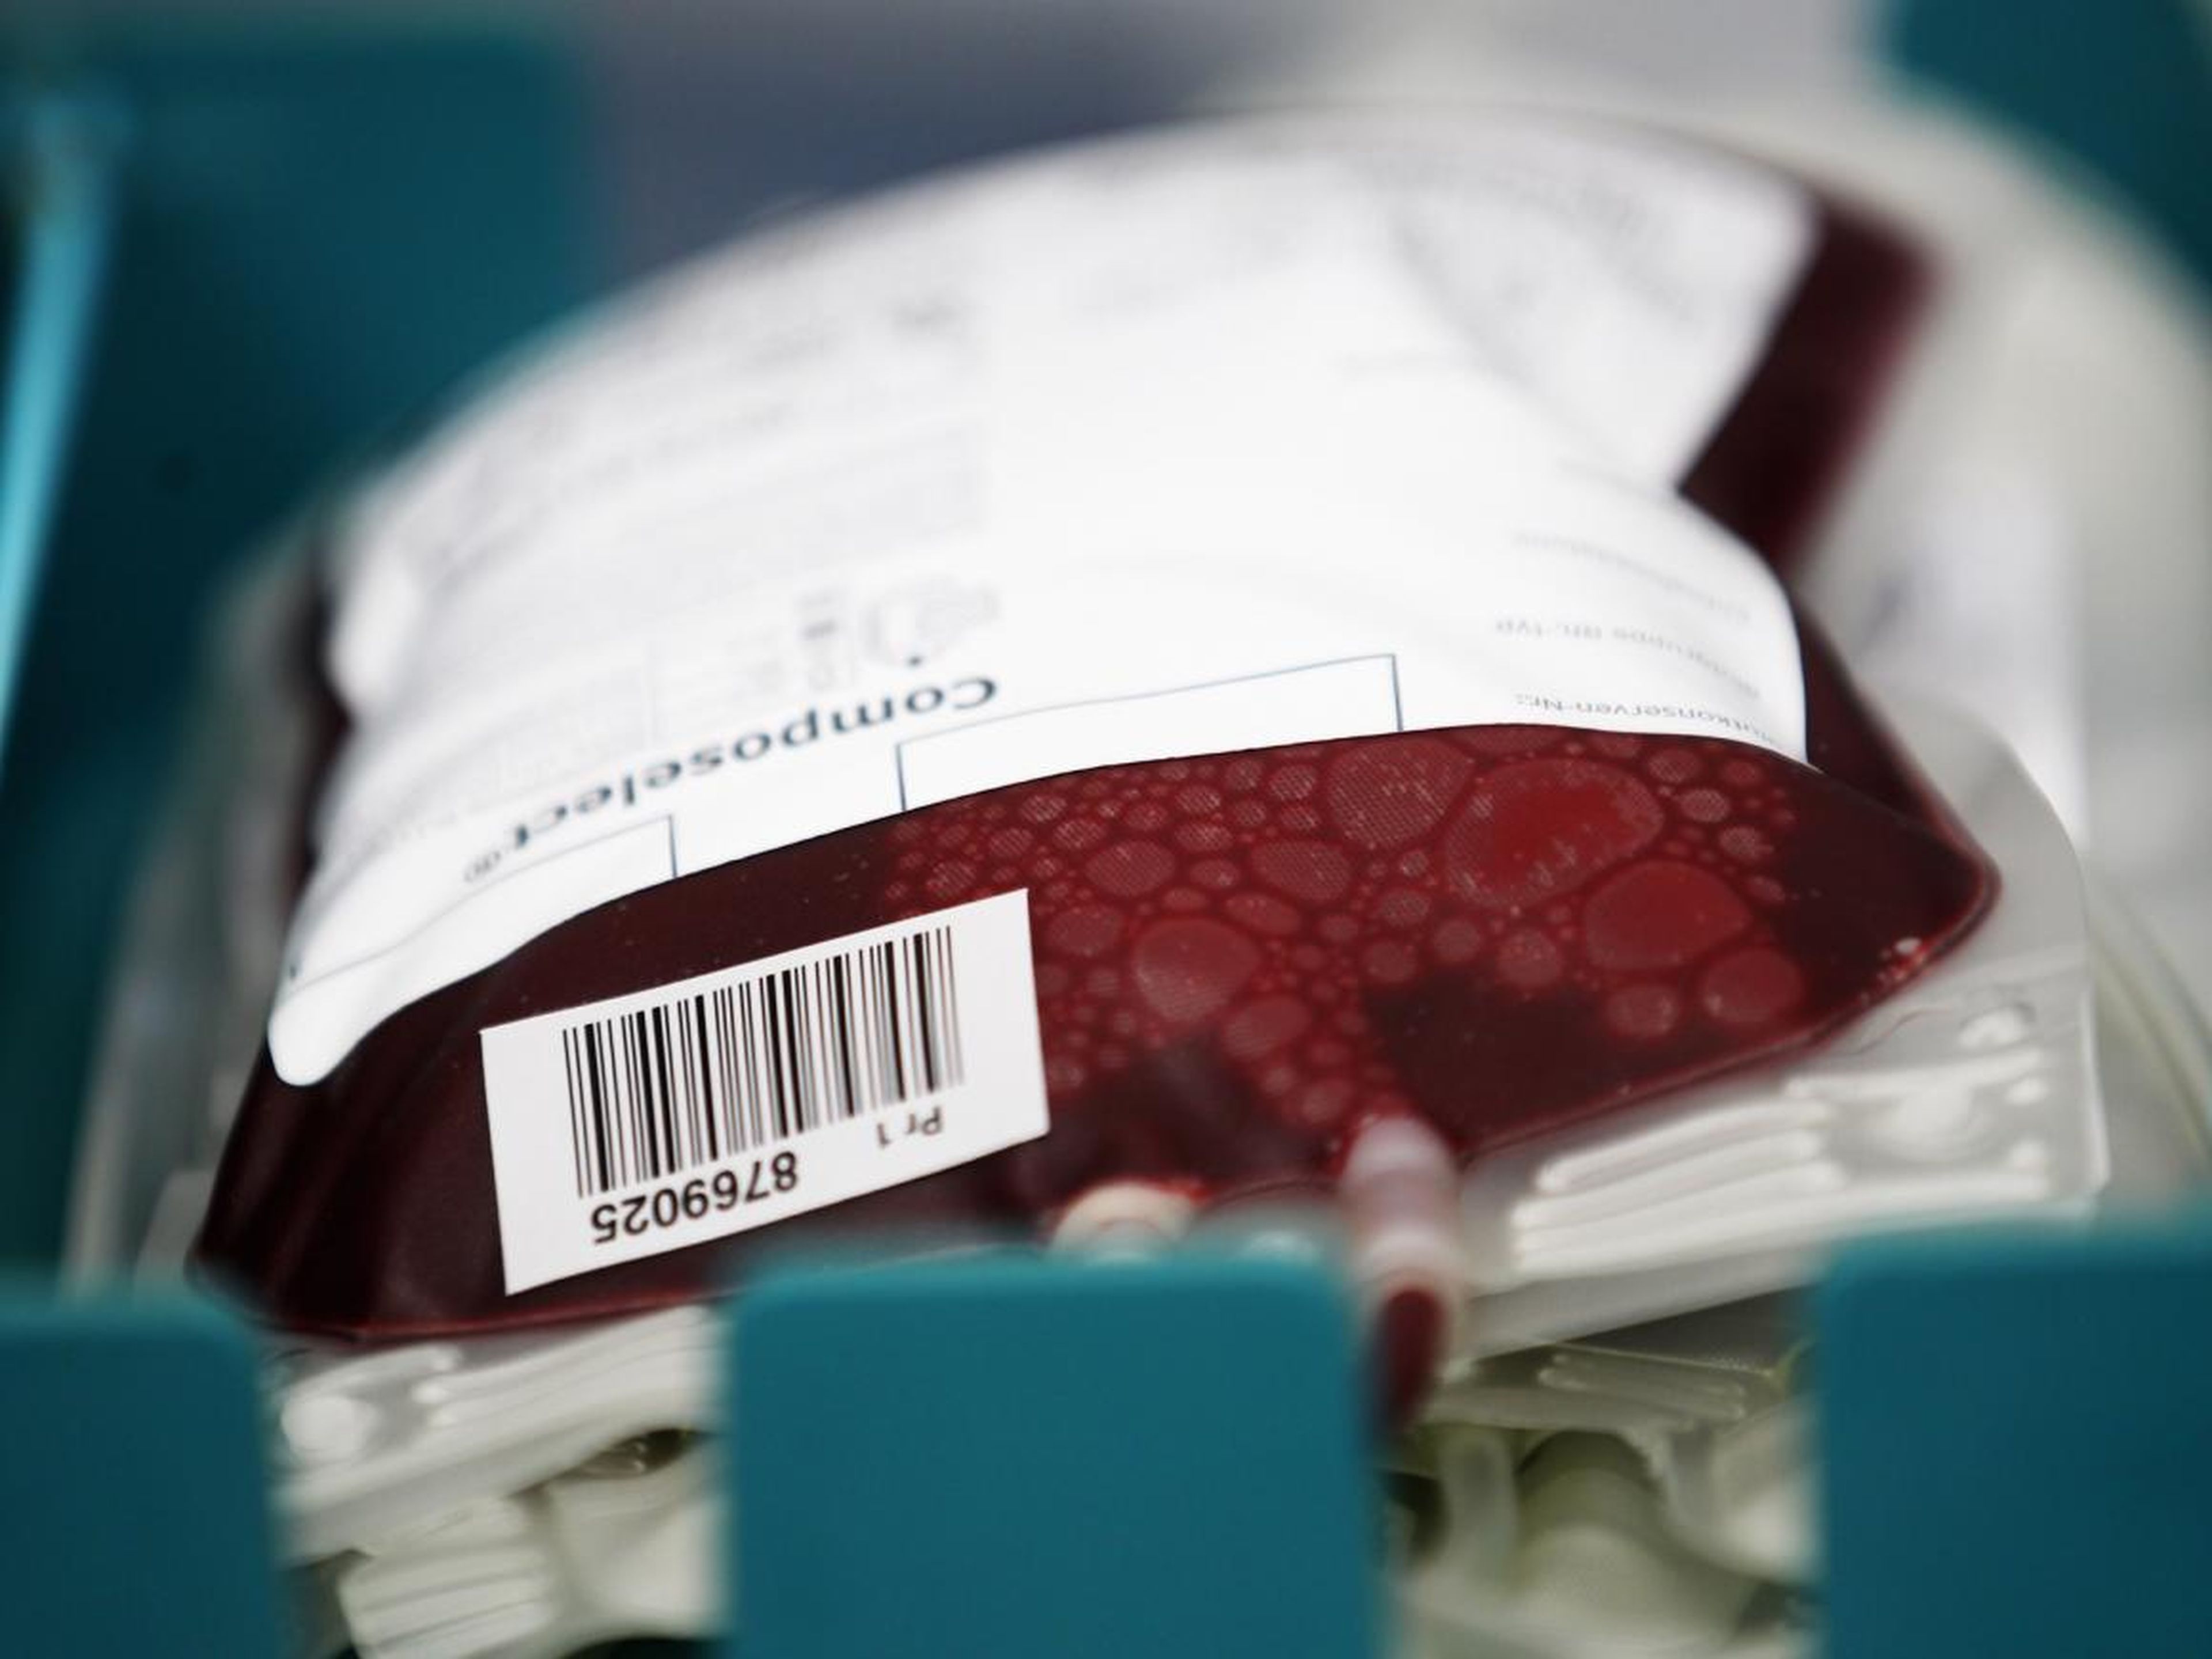 Inspired by weekly pleas for safe blood, Facebook created its blood donations tool in India.